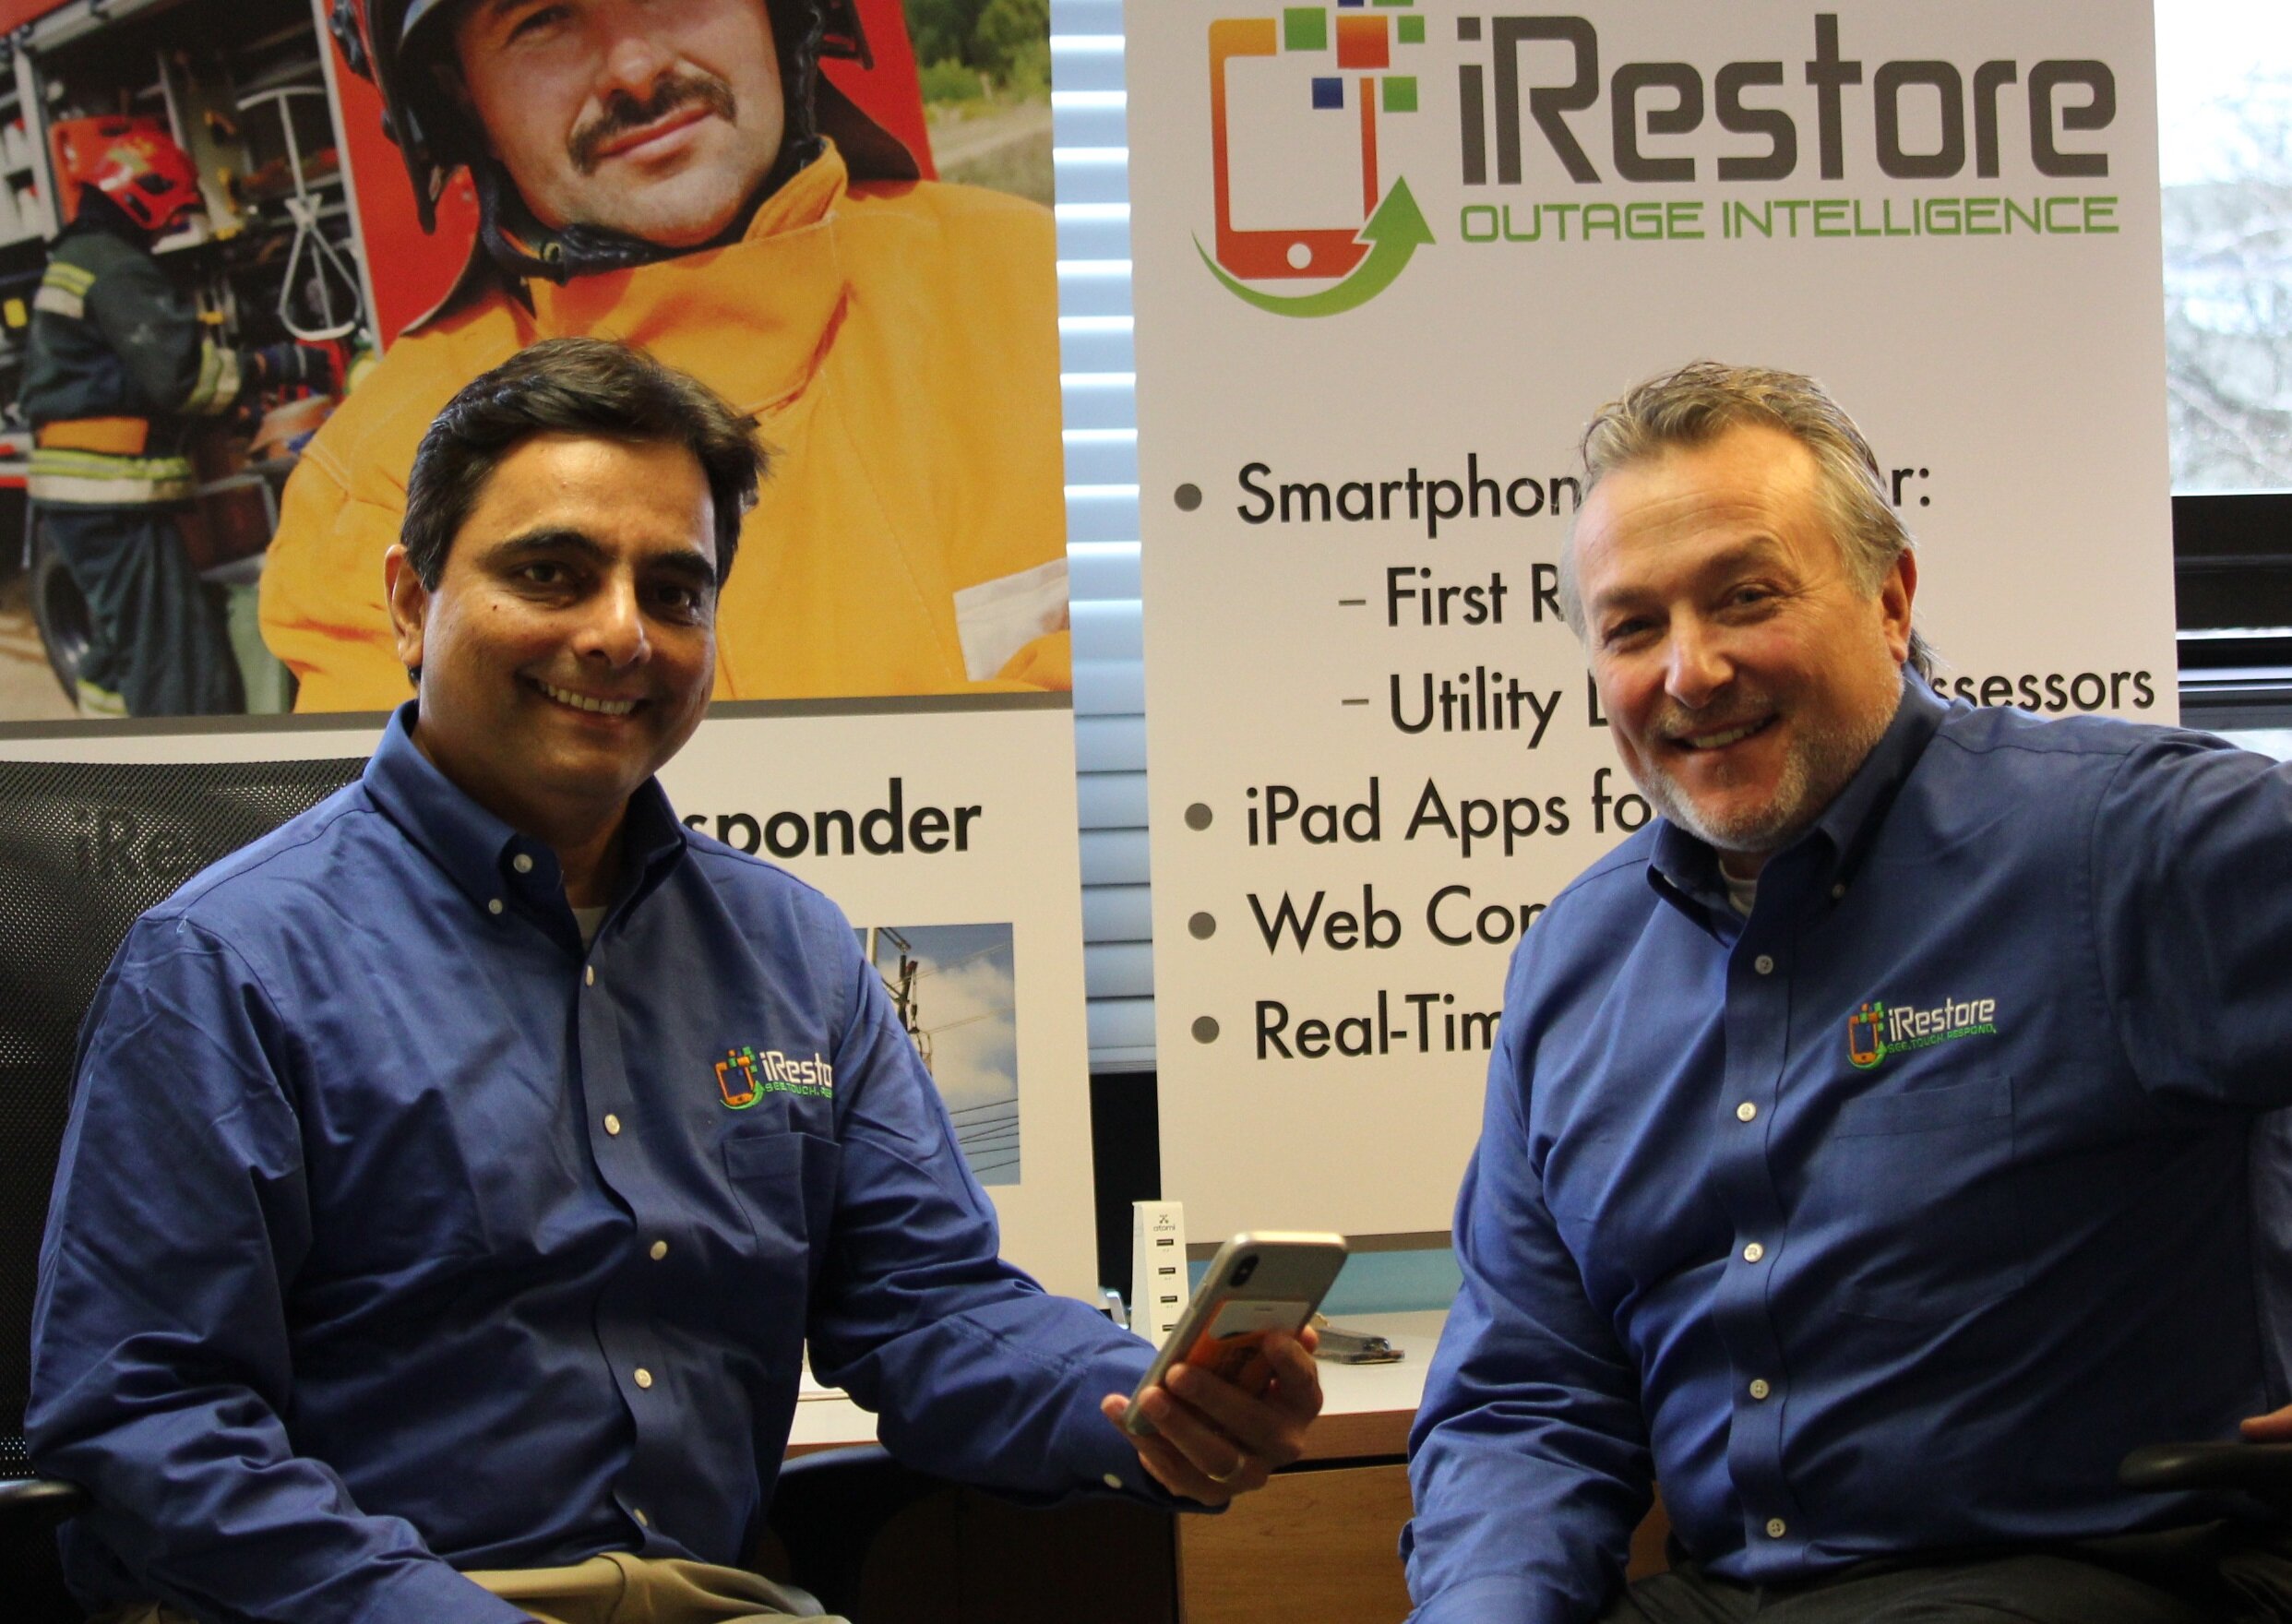 iRestore founder and CEO Deepak Swamy and EVP Michael Haeflich have worked extensively with remote teams, enabling the company to bring products to market and scale. They have spent the last 5 years creating a unique enterprise mobile platform and a…